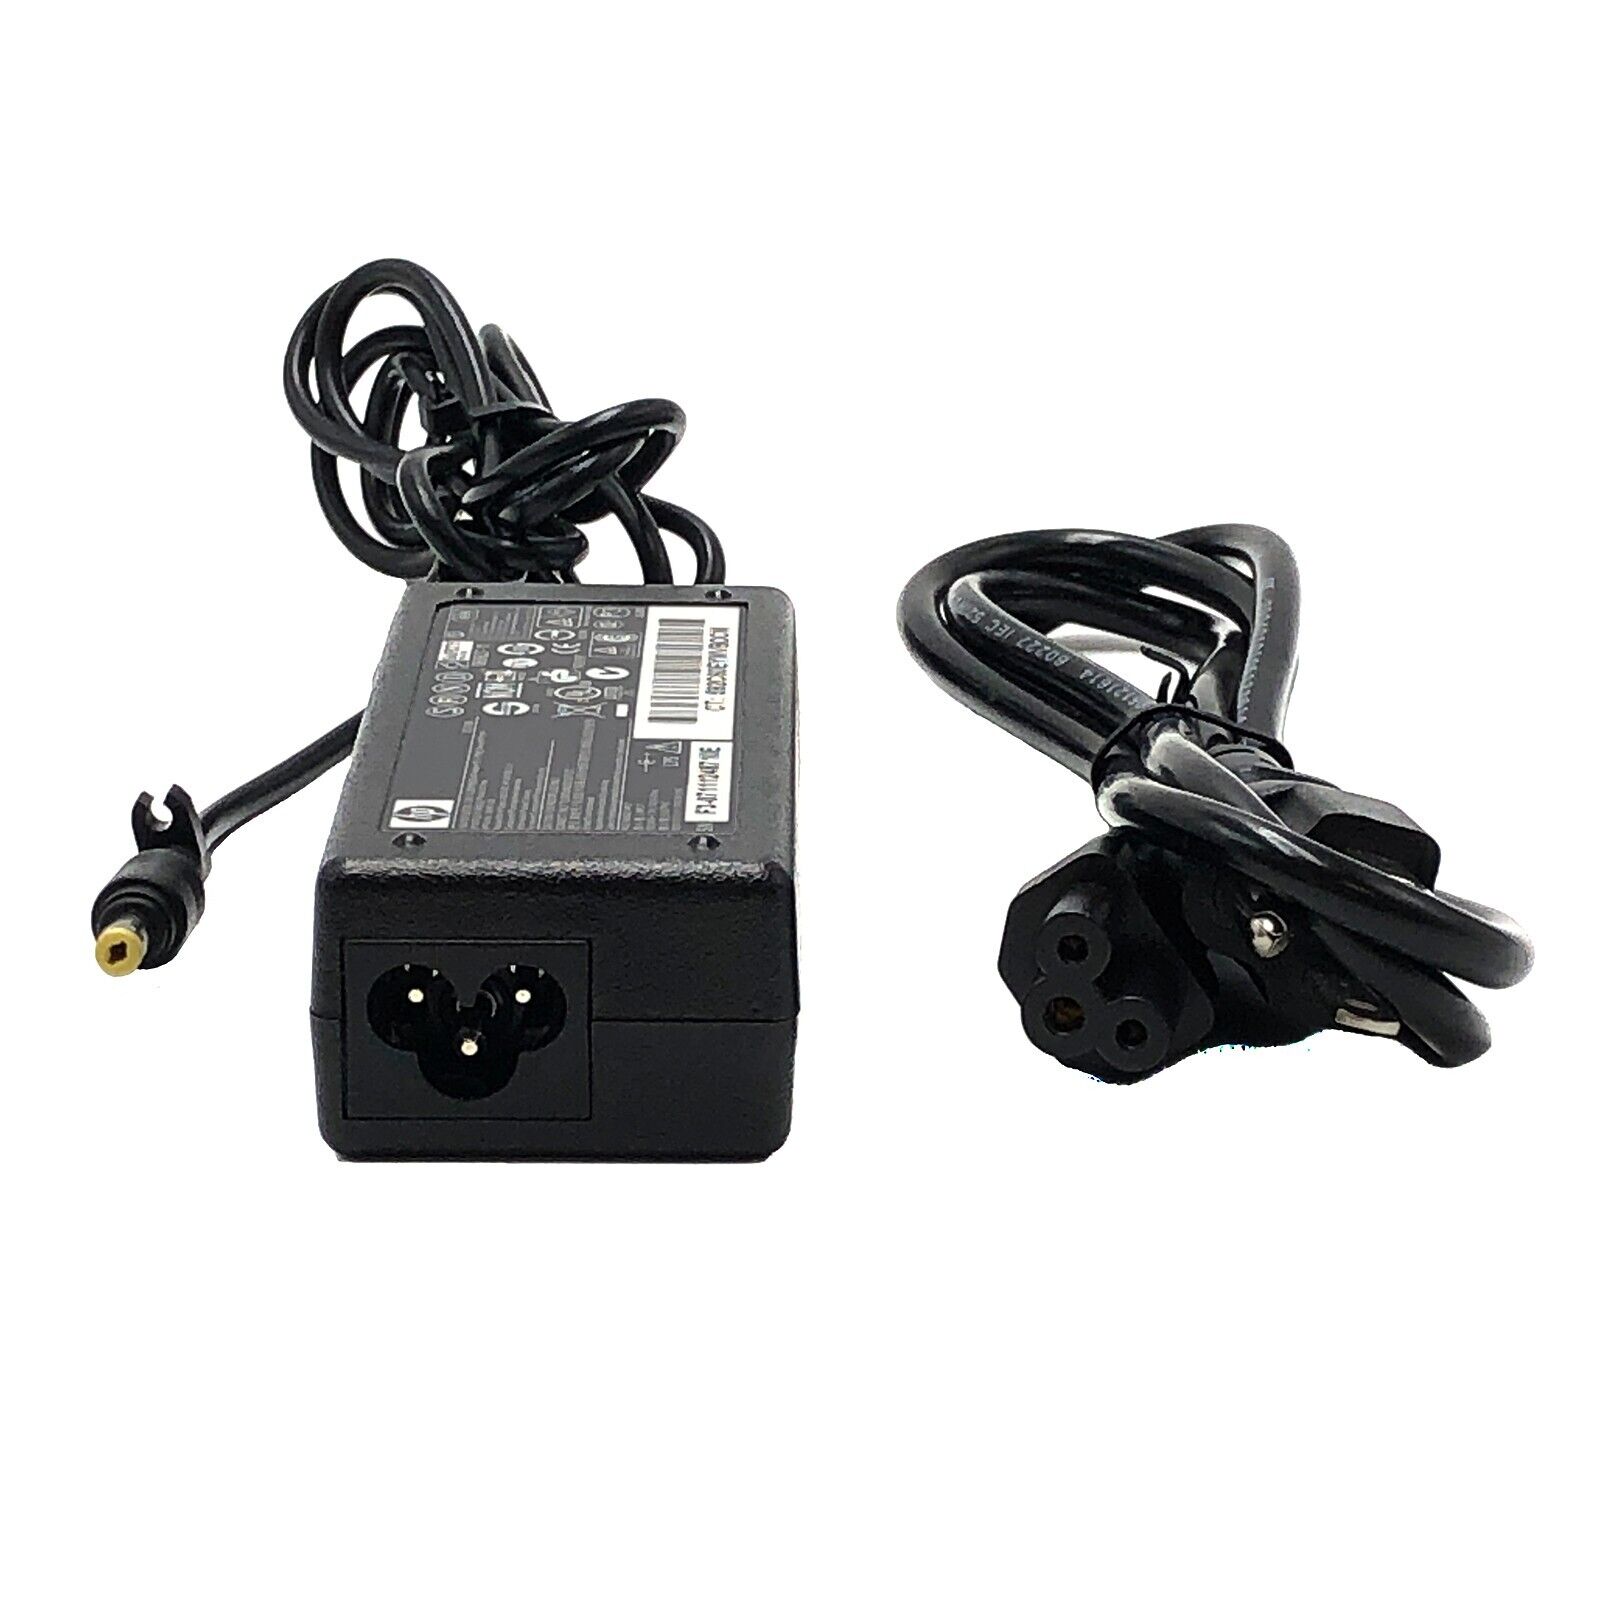 Genuine 65W HP AC Adapter for Compaq NC8000 NW8000 NW8240 Laptops Charger